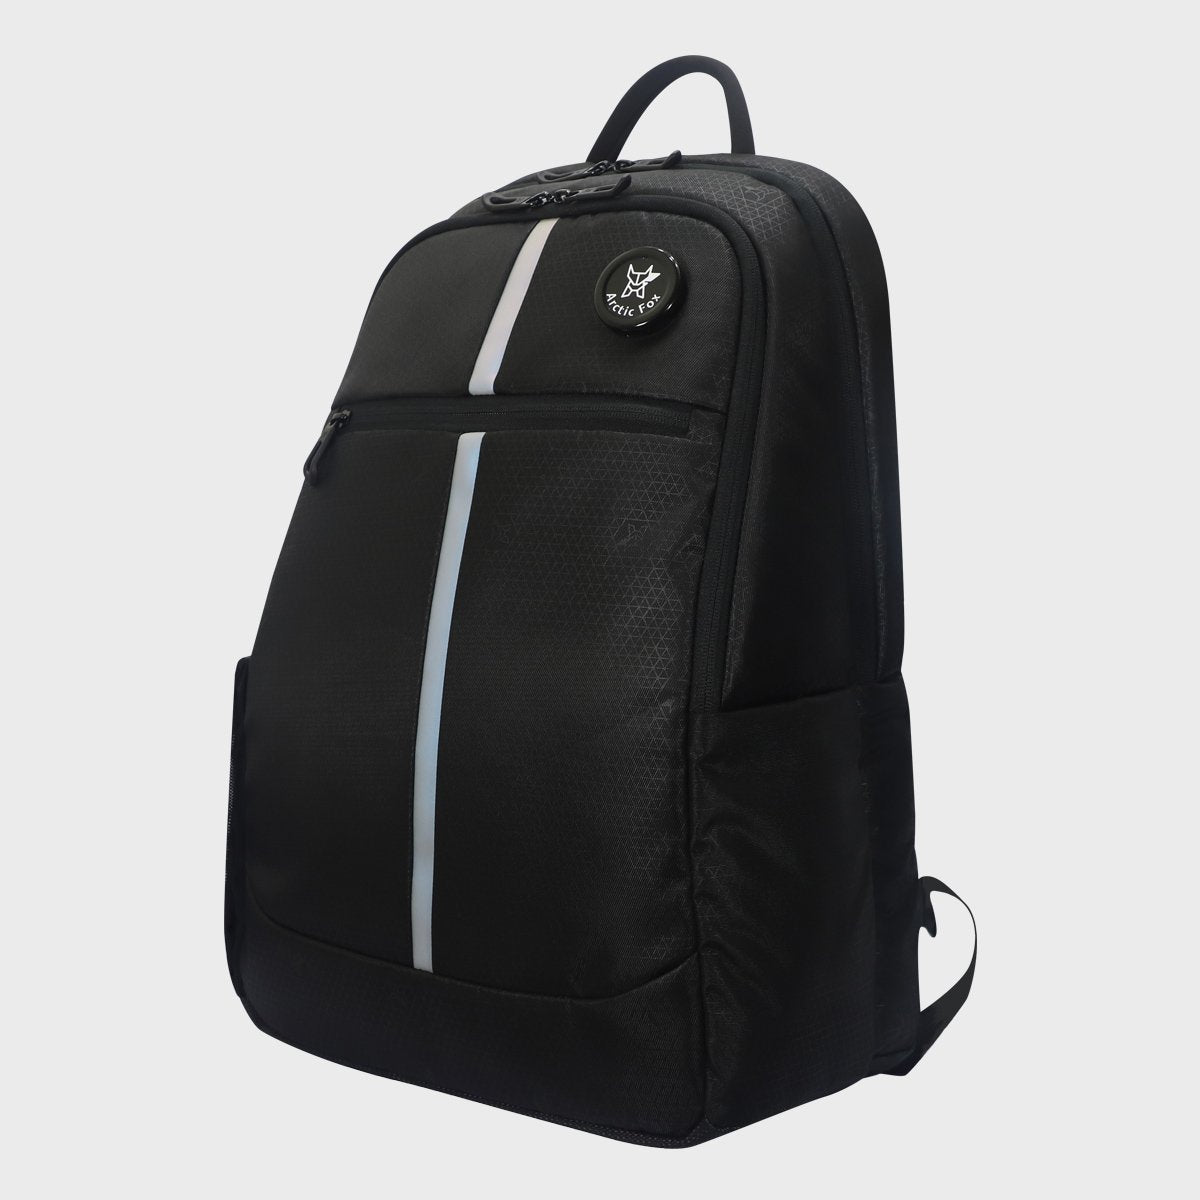 Arctic Fox Chrome Black Laptop bag and Backpack - front side